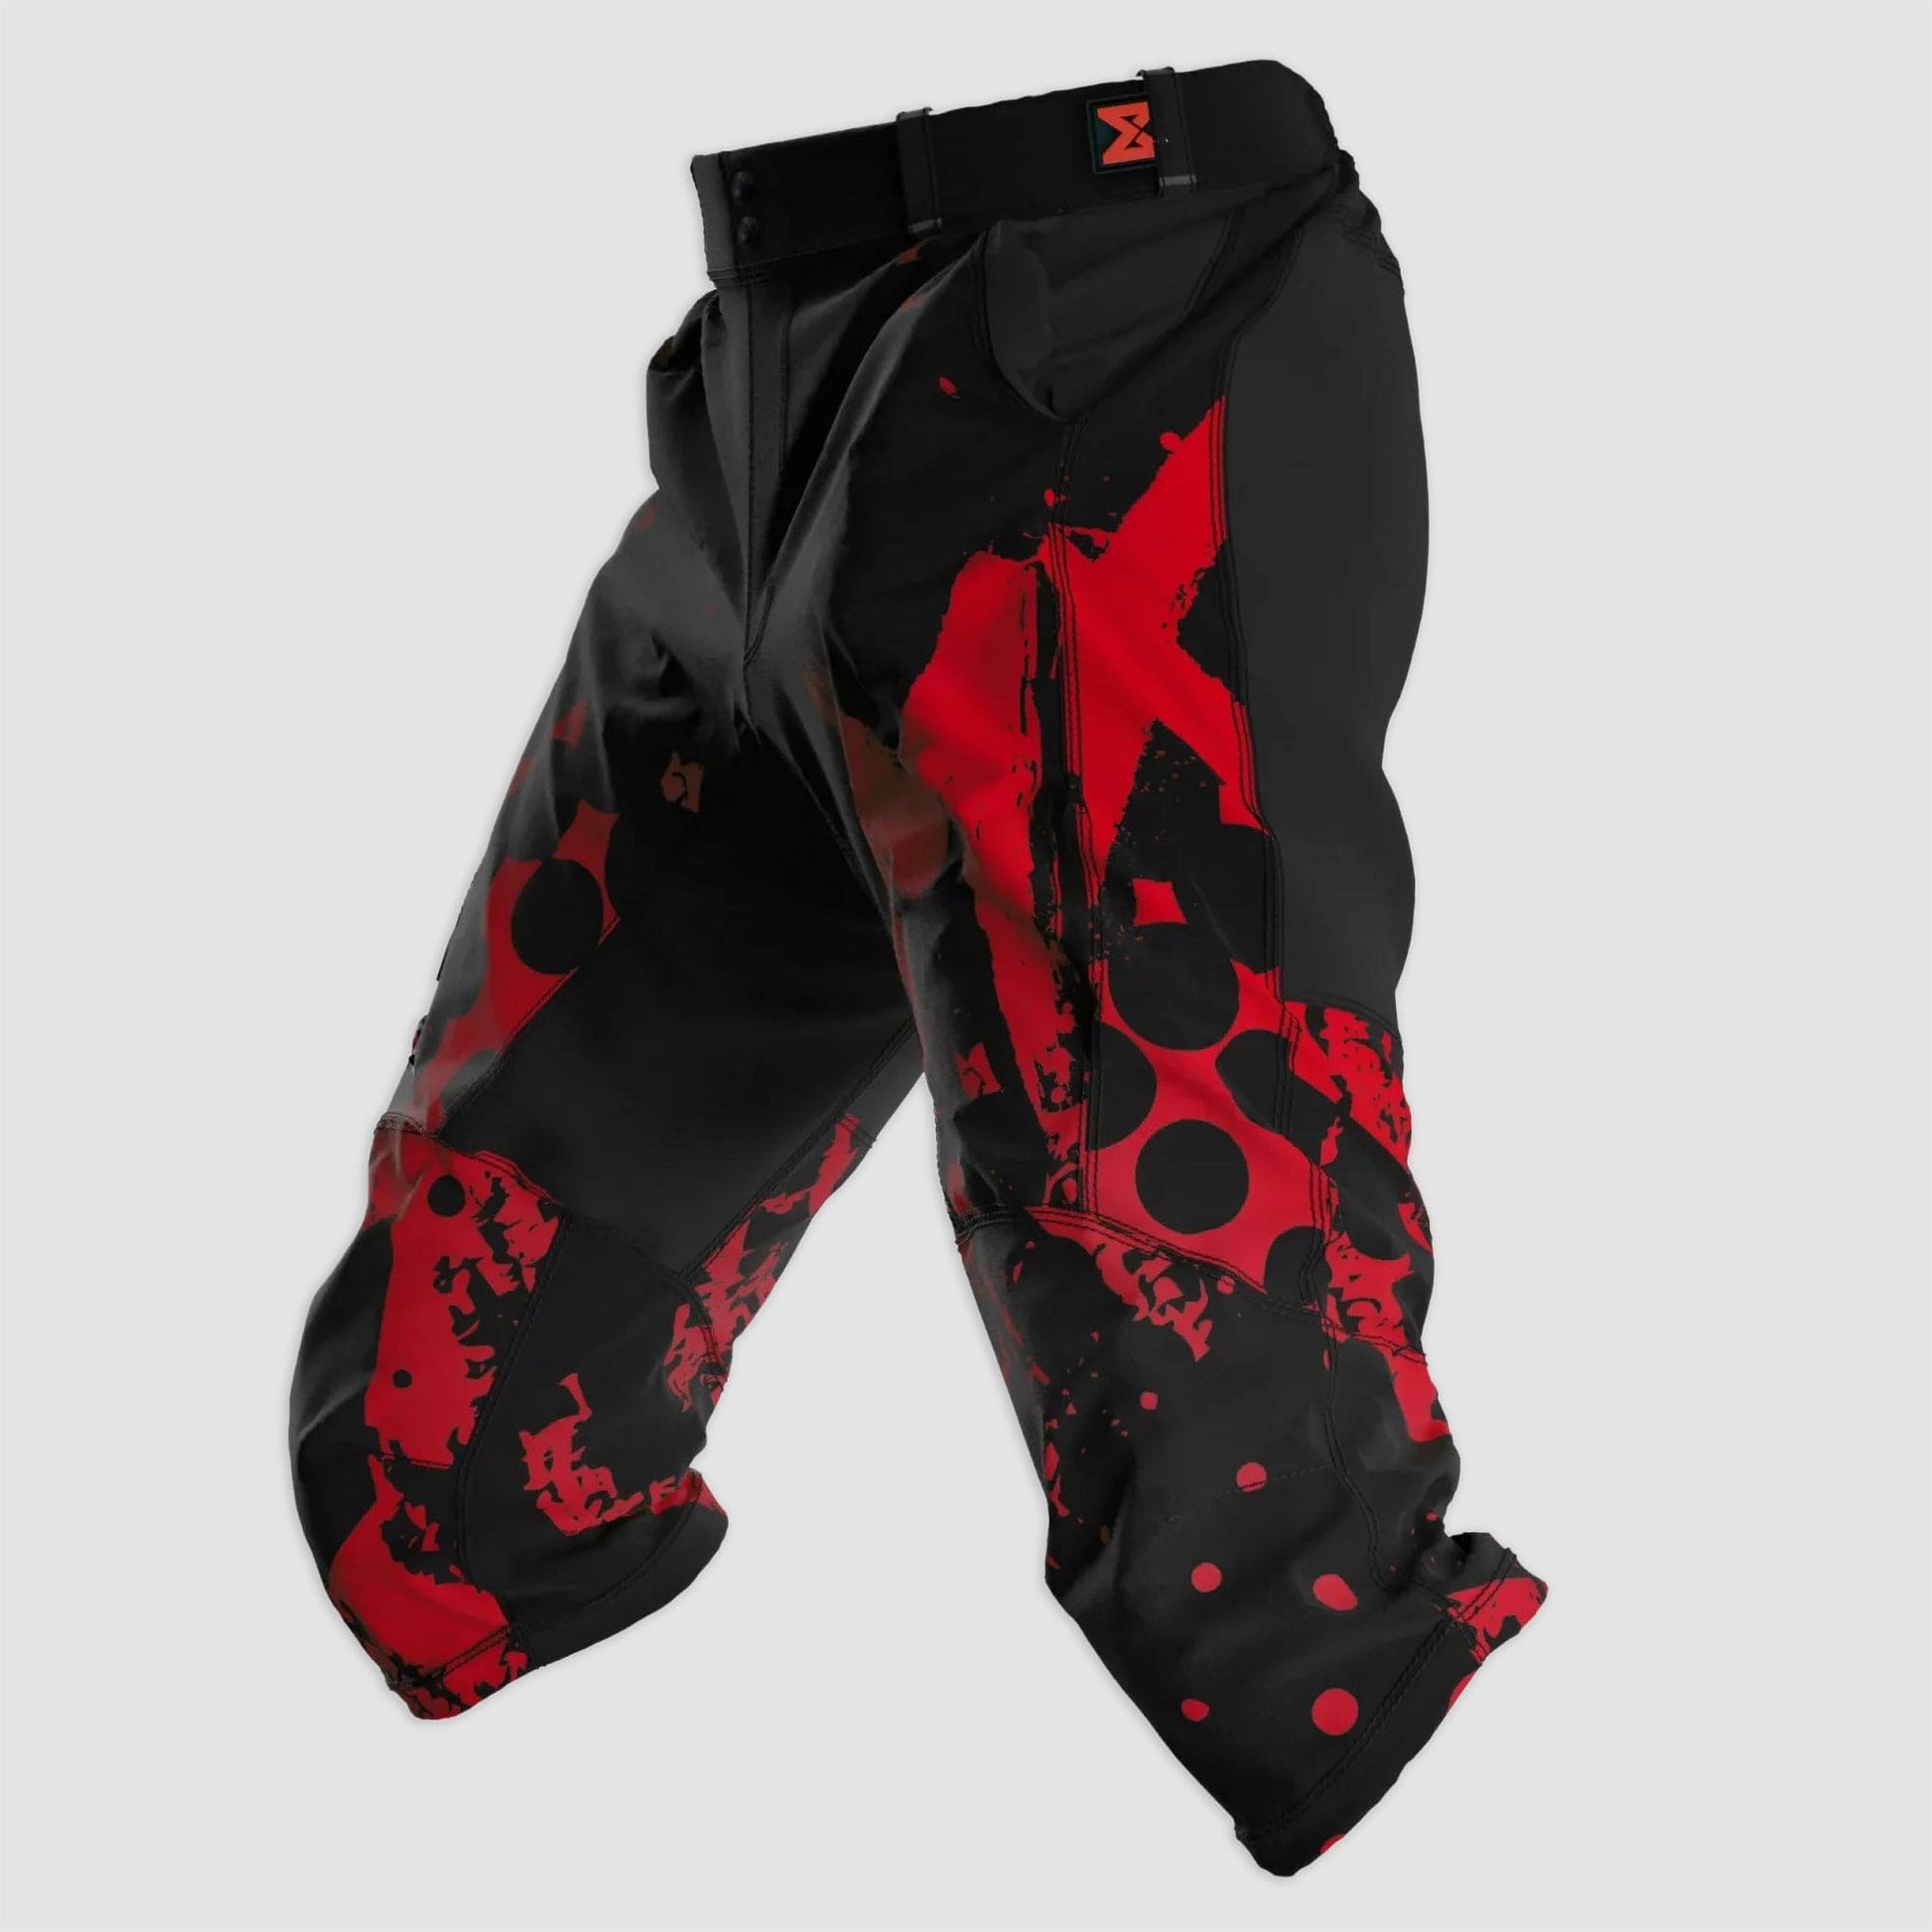 Manufactory Apparel Physical product X-Small / Red Dynamx MX Series Short